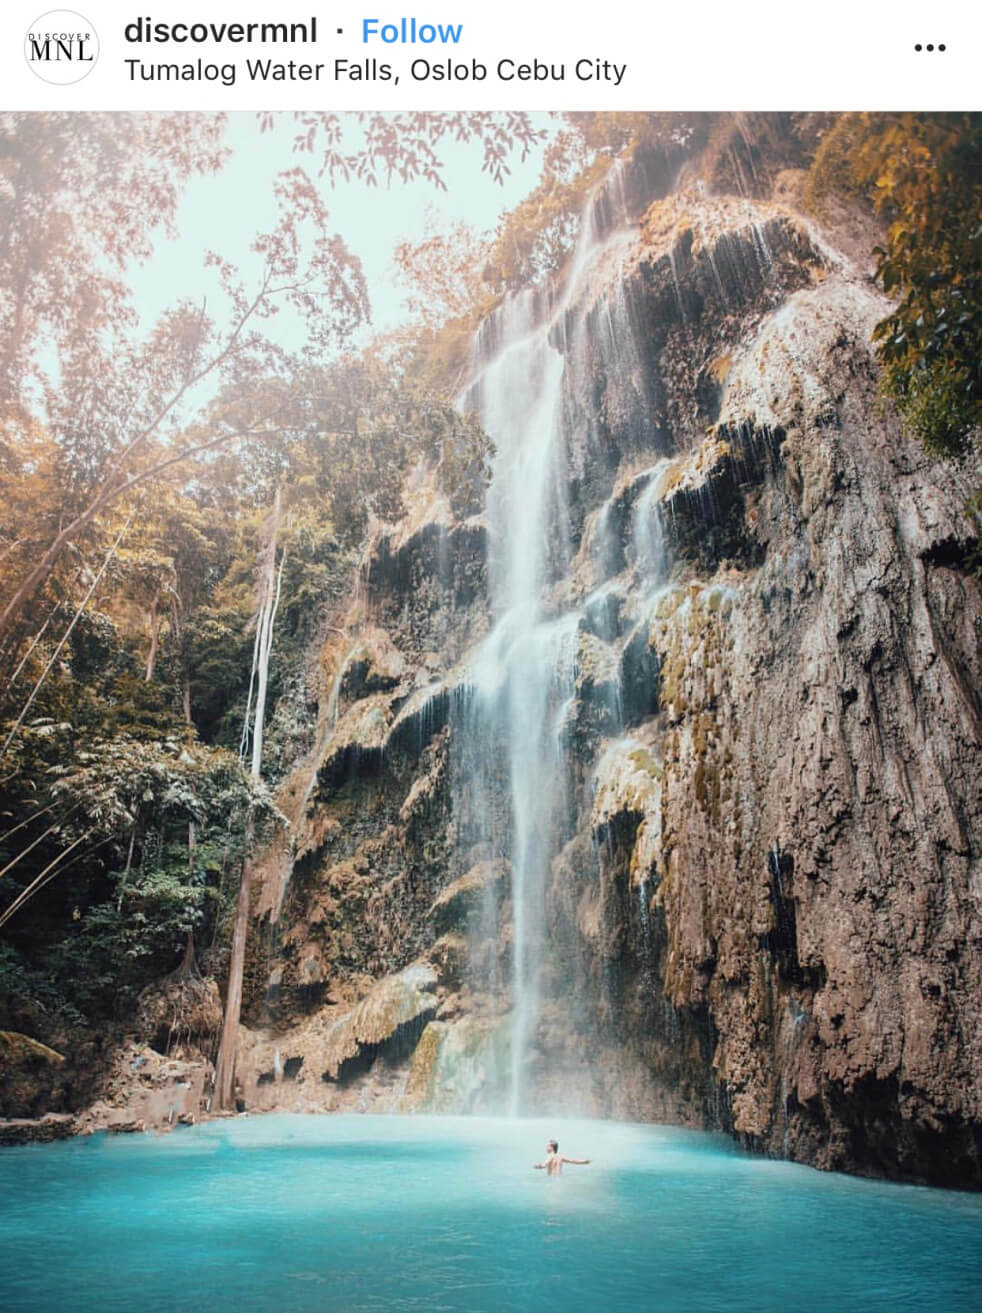 Tumalog Waterfalls- The Top 20 Best Instagram Locations in the Philippines!